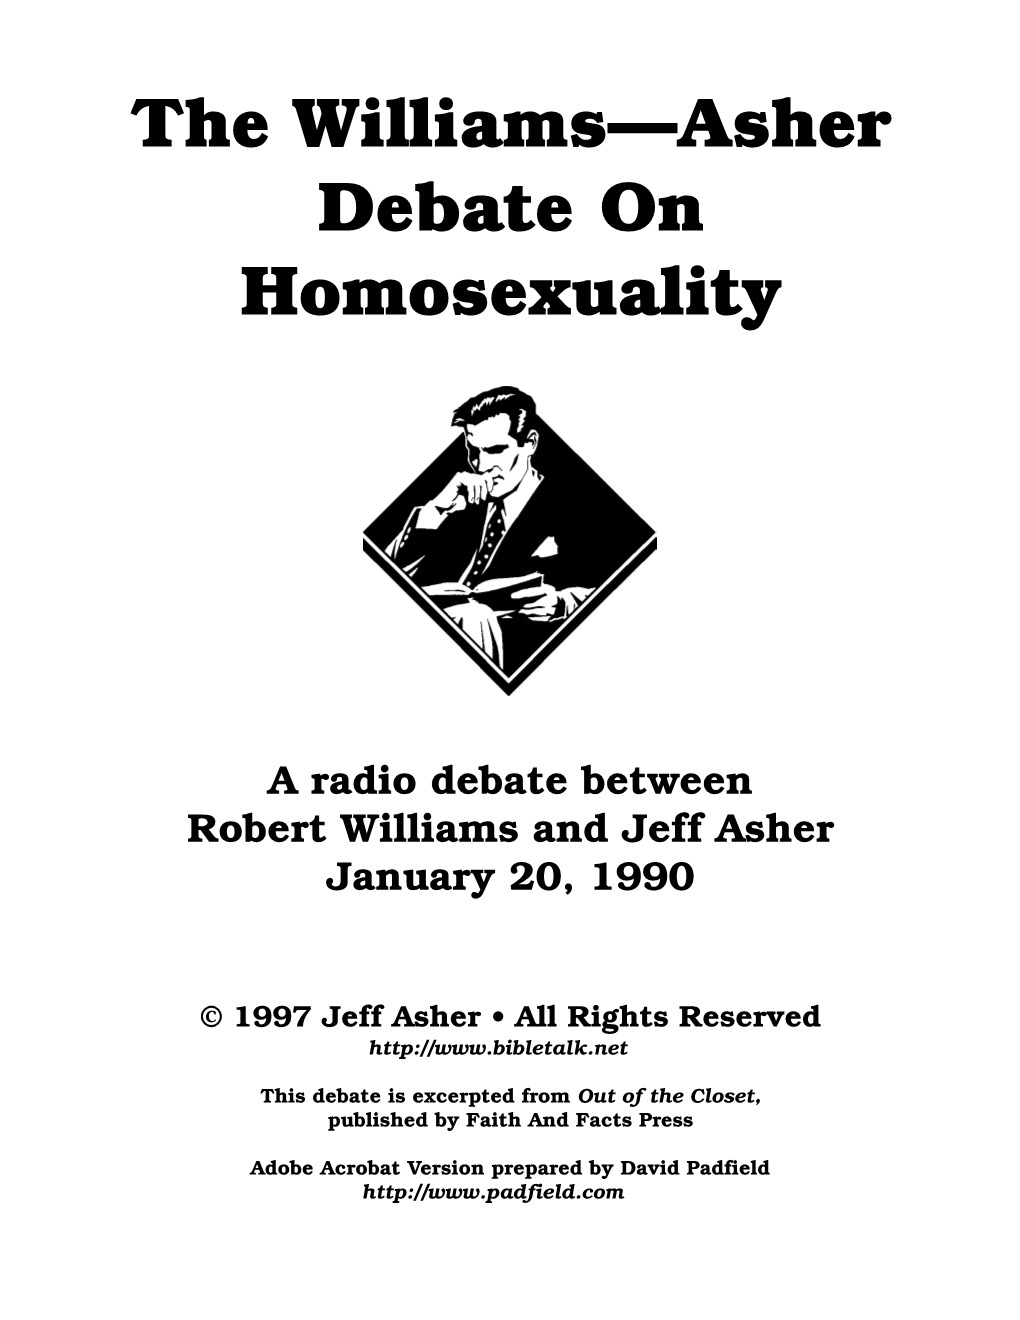 Williams–Asher Debate on Homosexuality